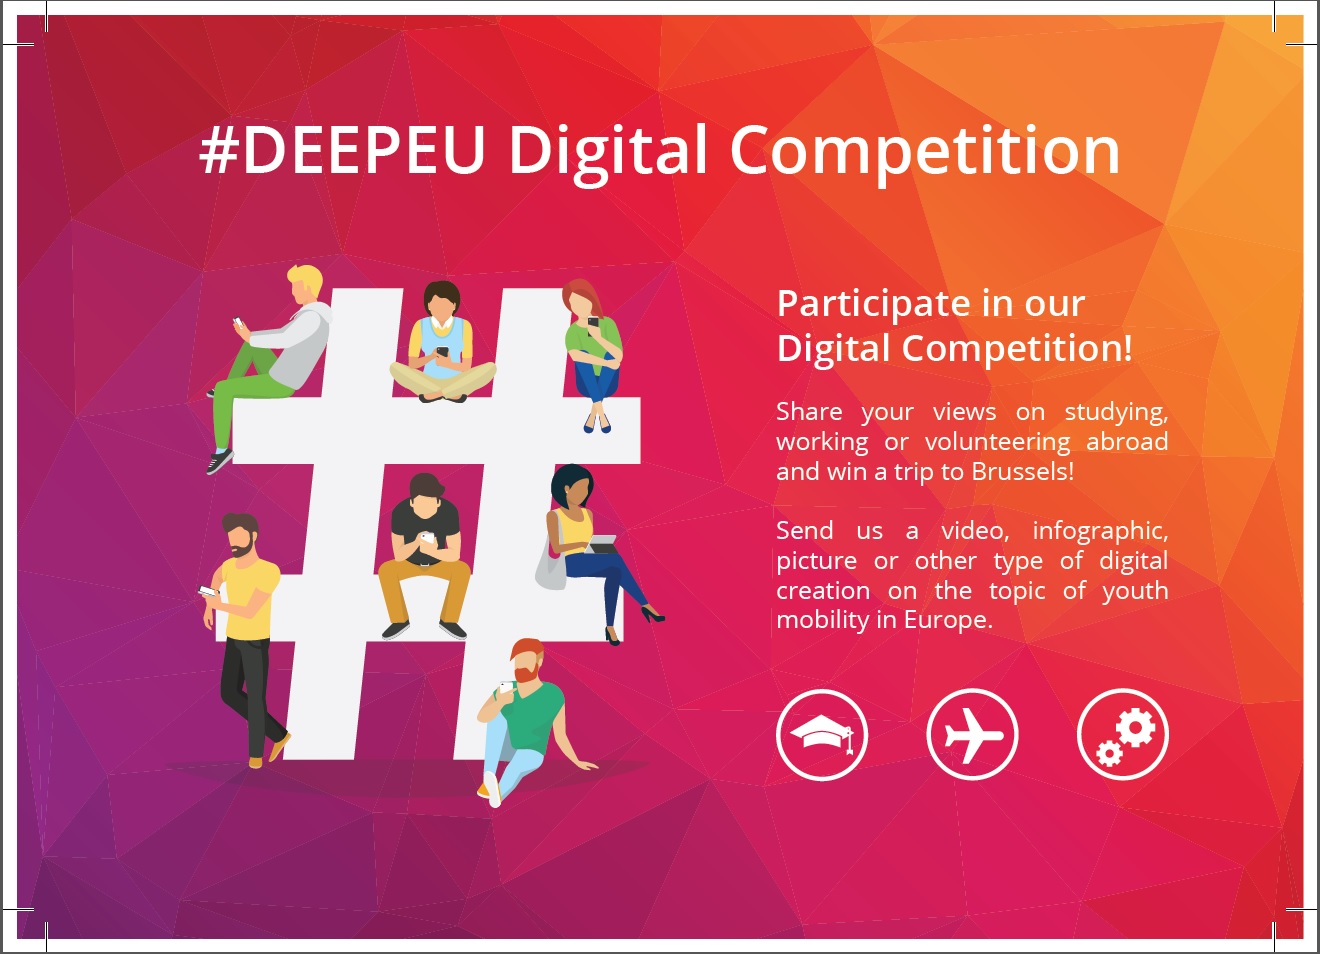 Participate in competitions. To participate in Competition. Participate. Share your view.